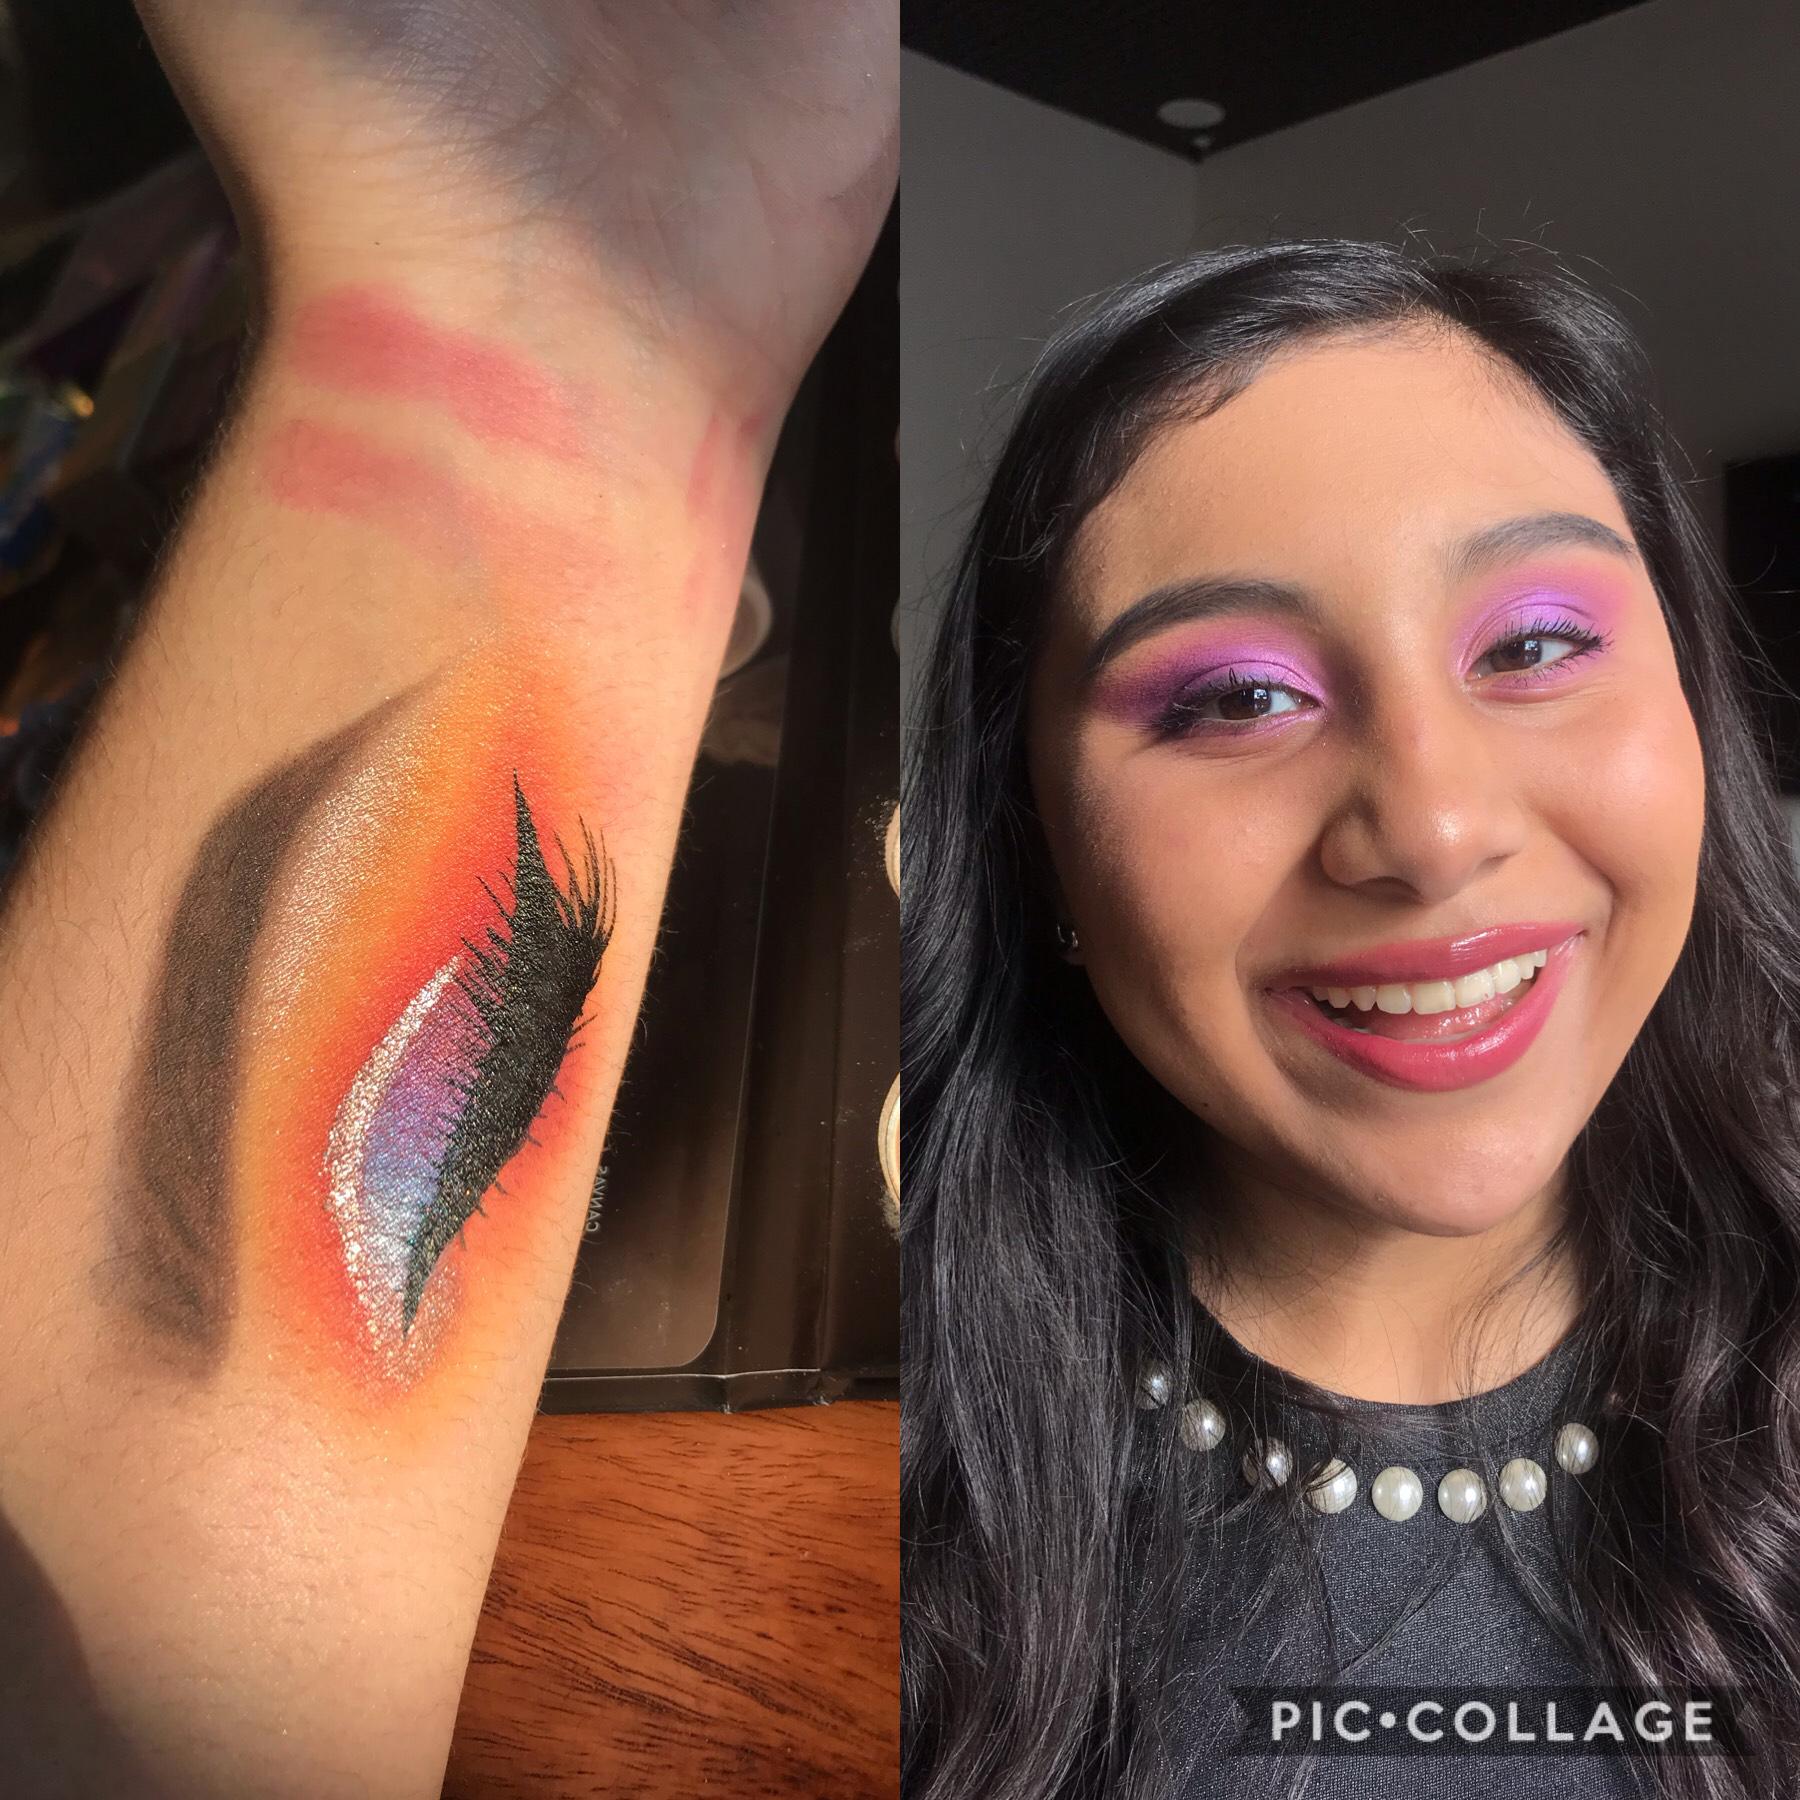 Had my bday party yesterday w two of my friends and i did one of thems makeup. We also watched the office, parks and rec, and i told my friend about what a mess riverdale is atm lol she was dead. 